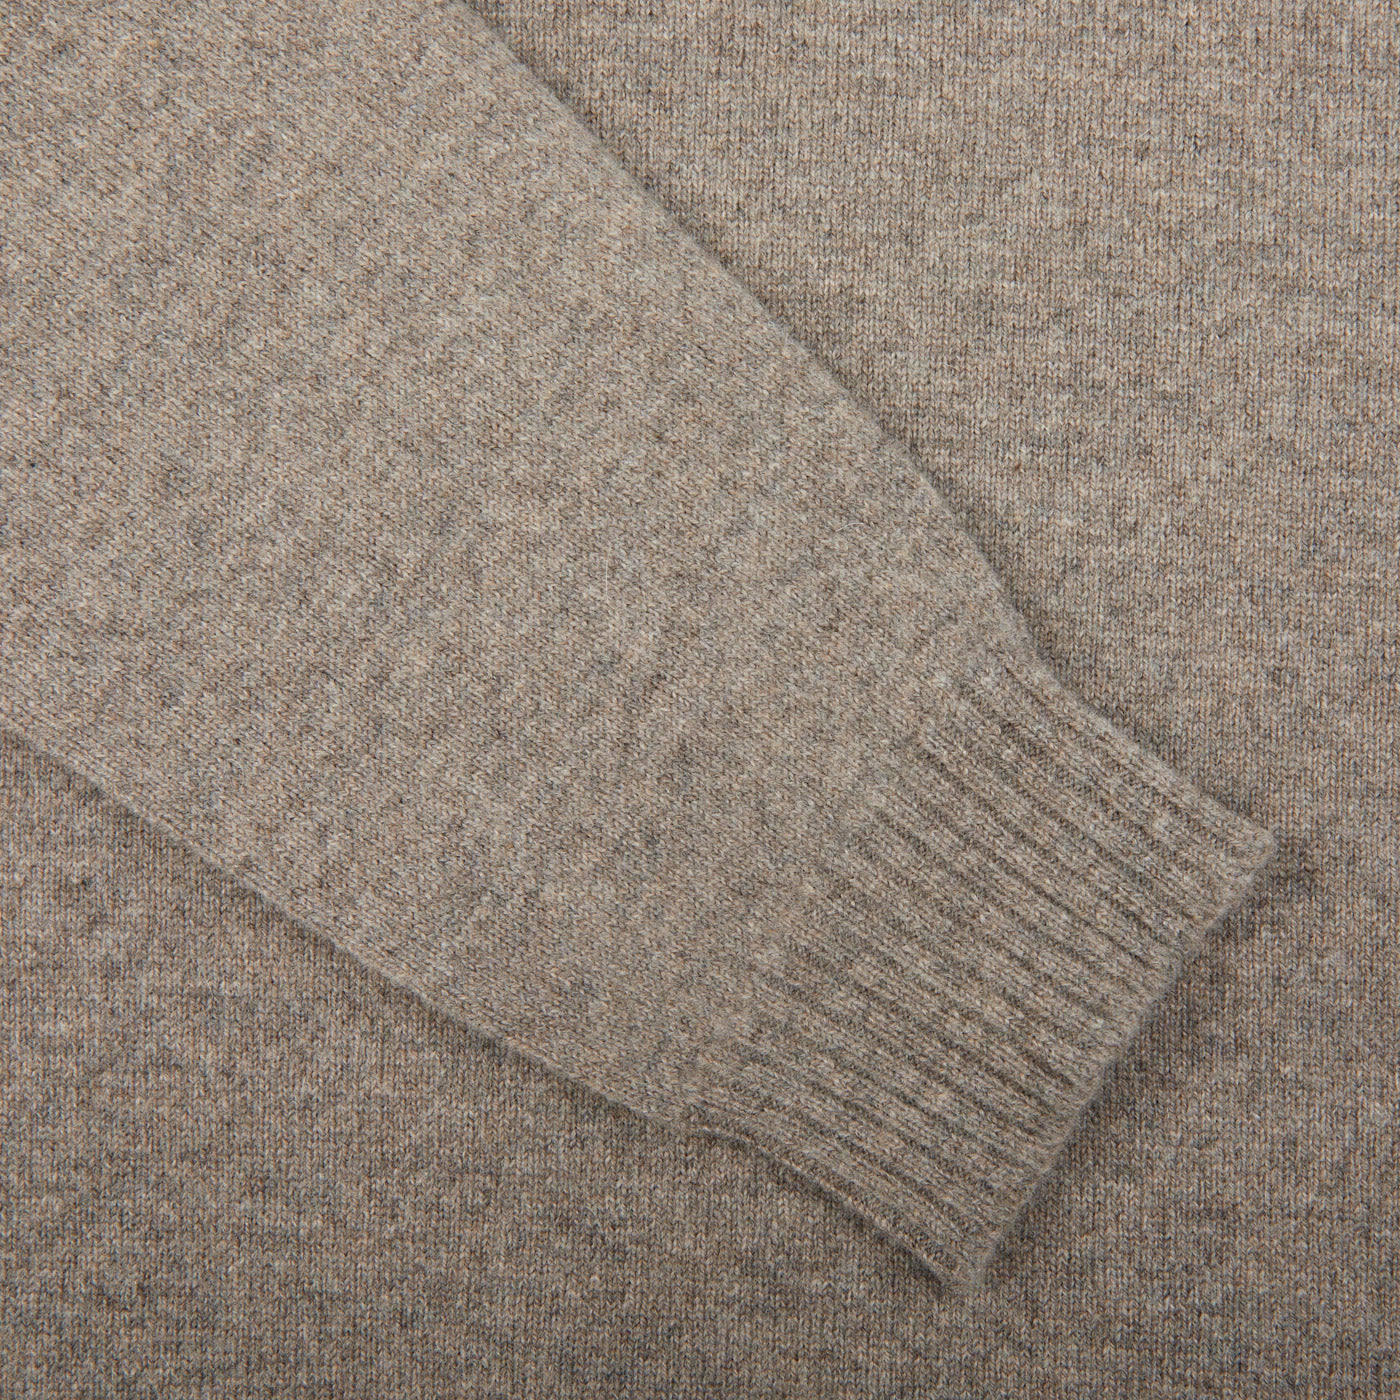 A close up of a William Lockie Vole Beige Crew Neck Lambswool Sweater.